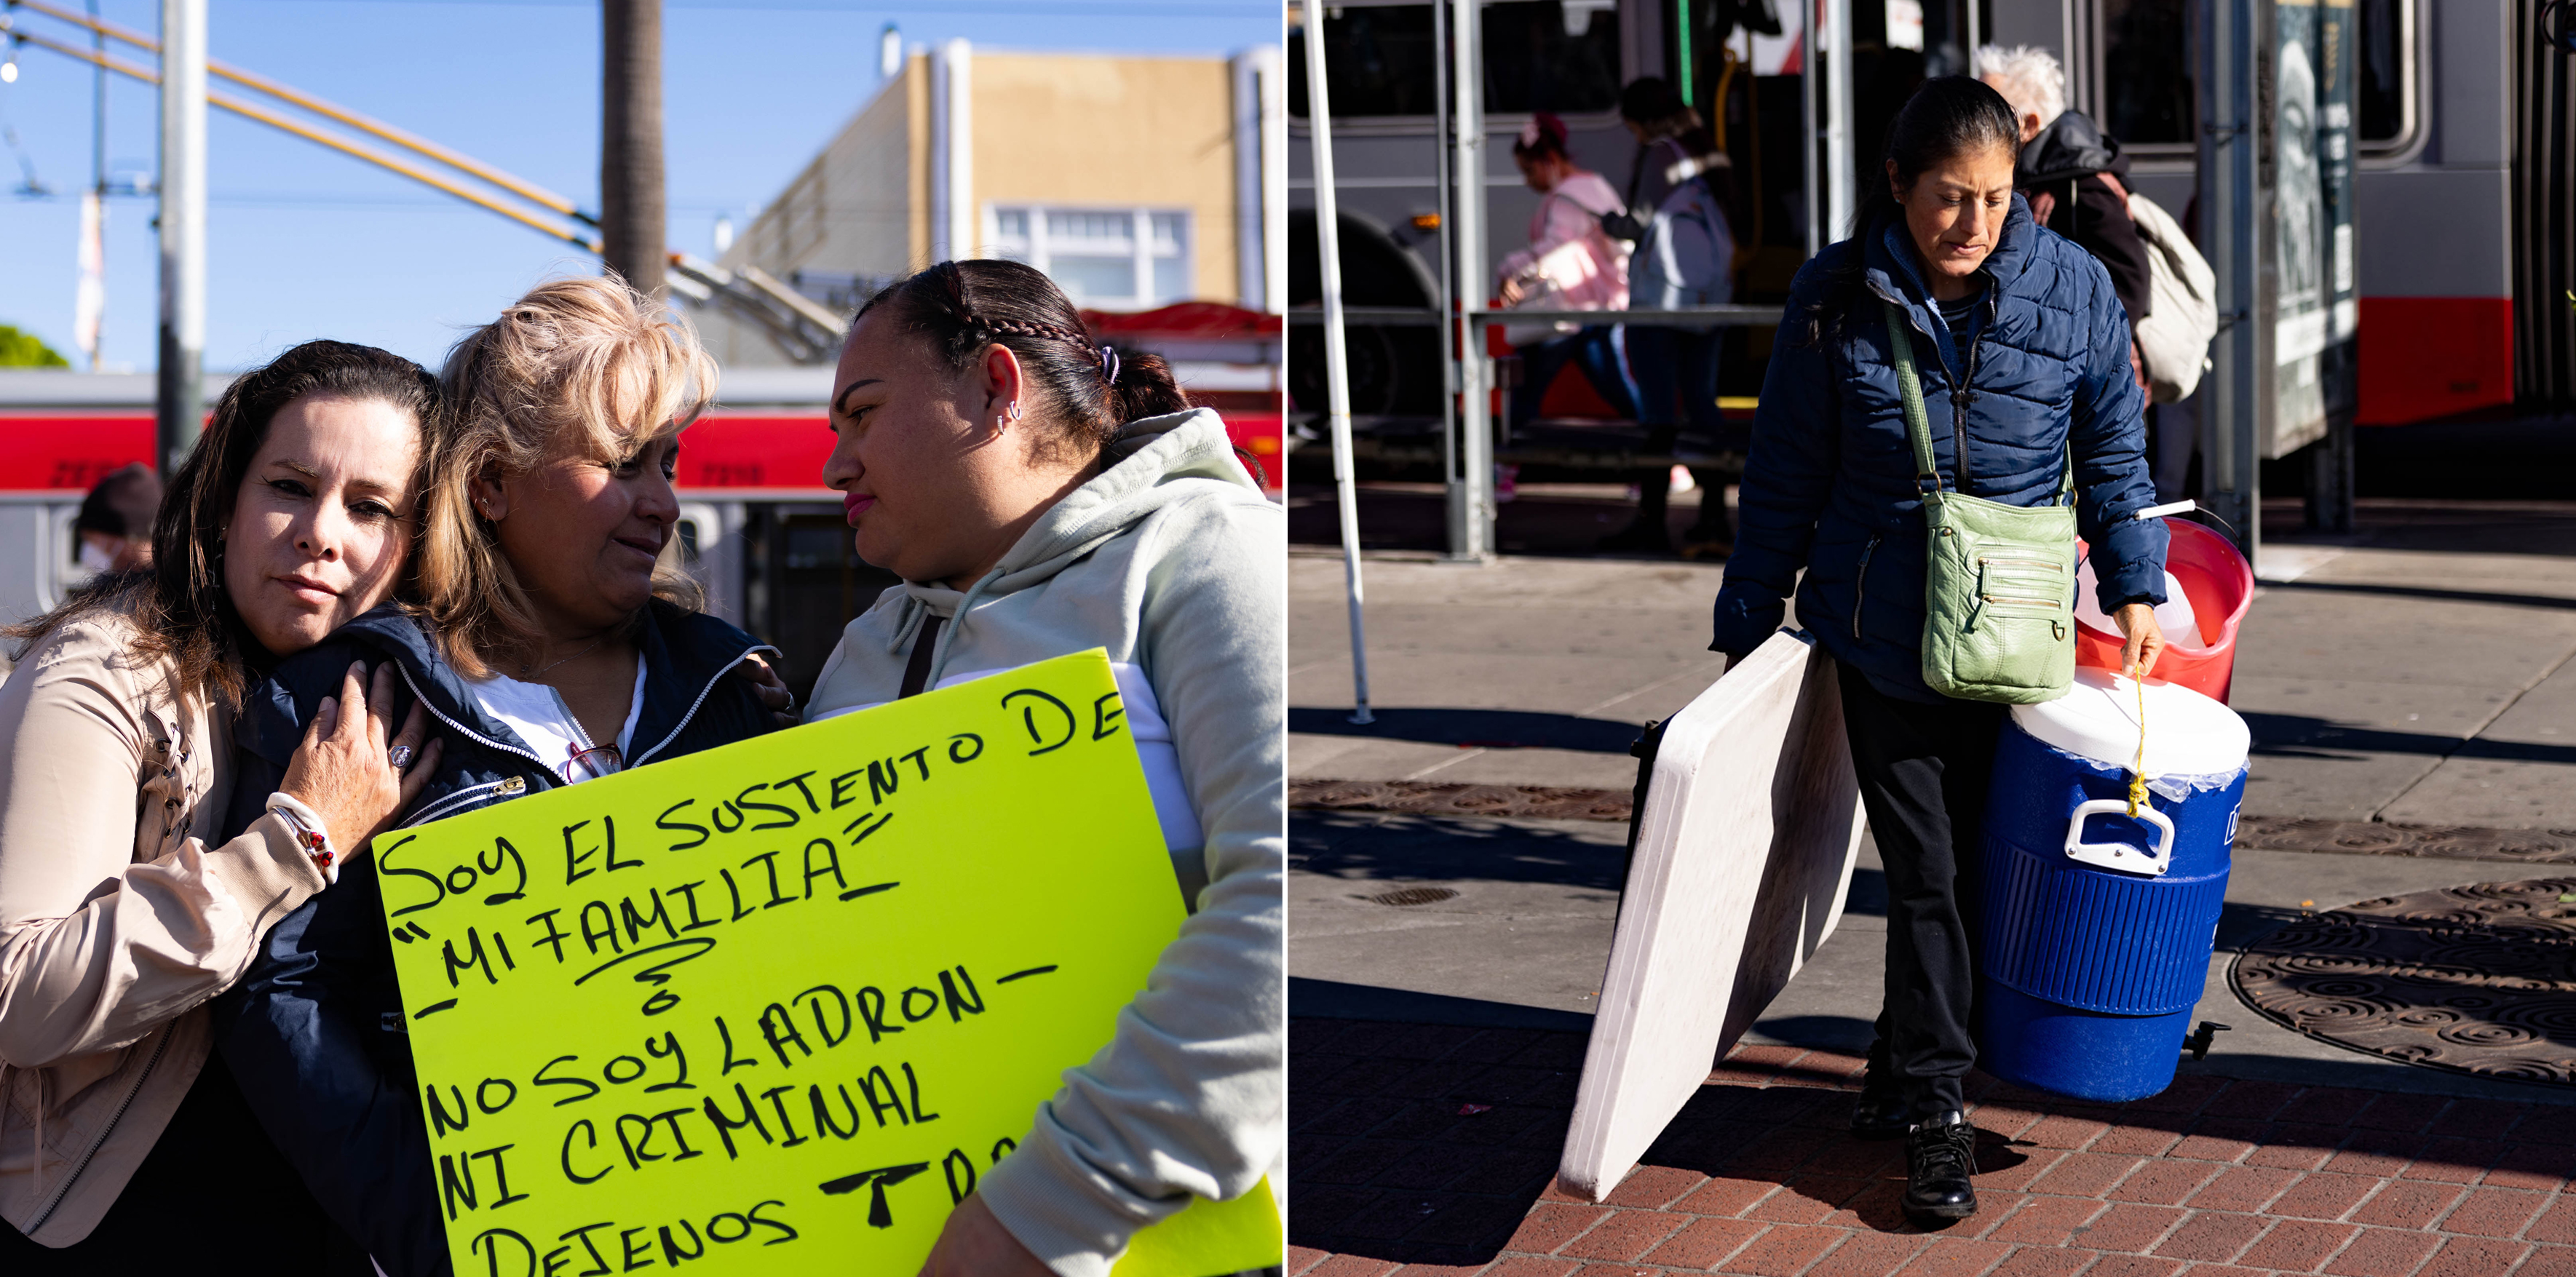 Two side by side photos of 3 women comforting themselves with a sign that reads &quot;Soy el sustento De 'Mi Familia' - No Soy Ladon Ni Criminal ...&quot;